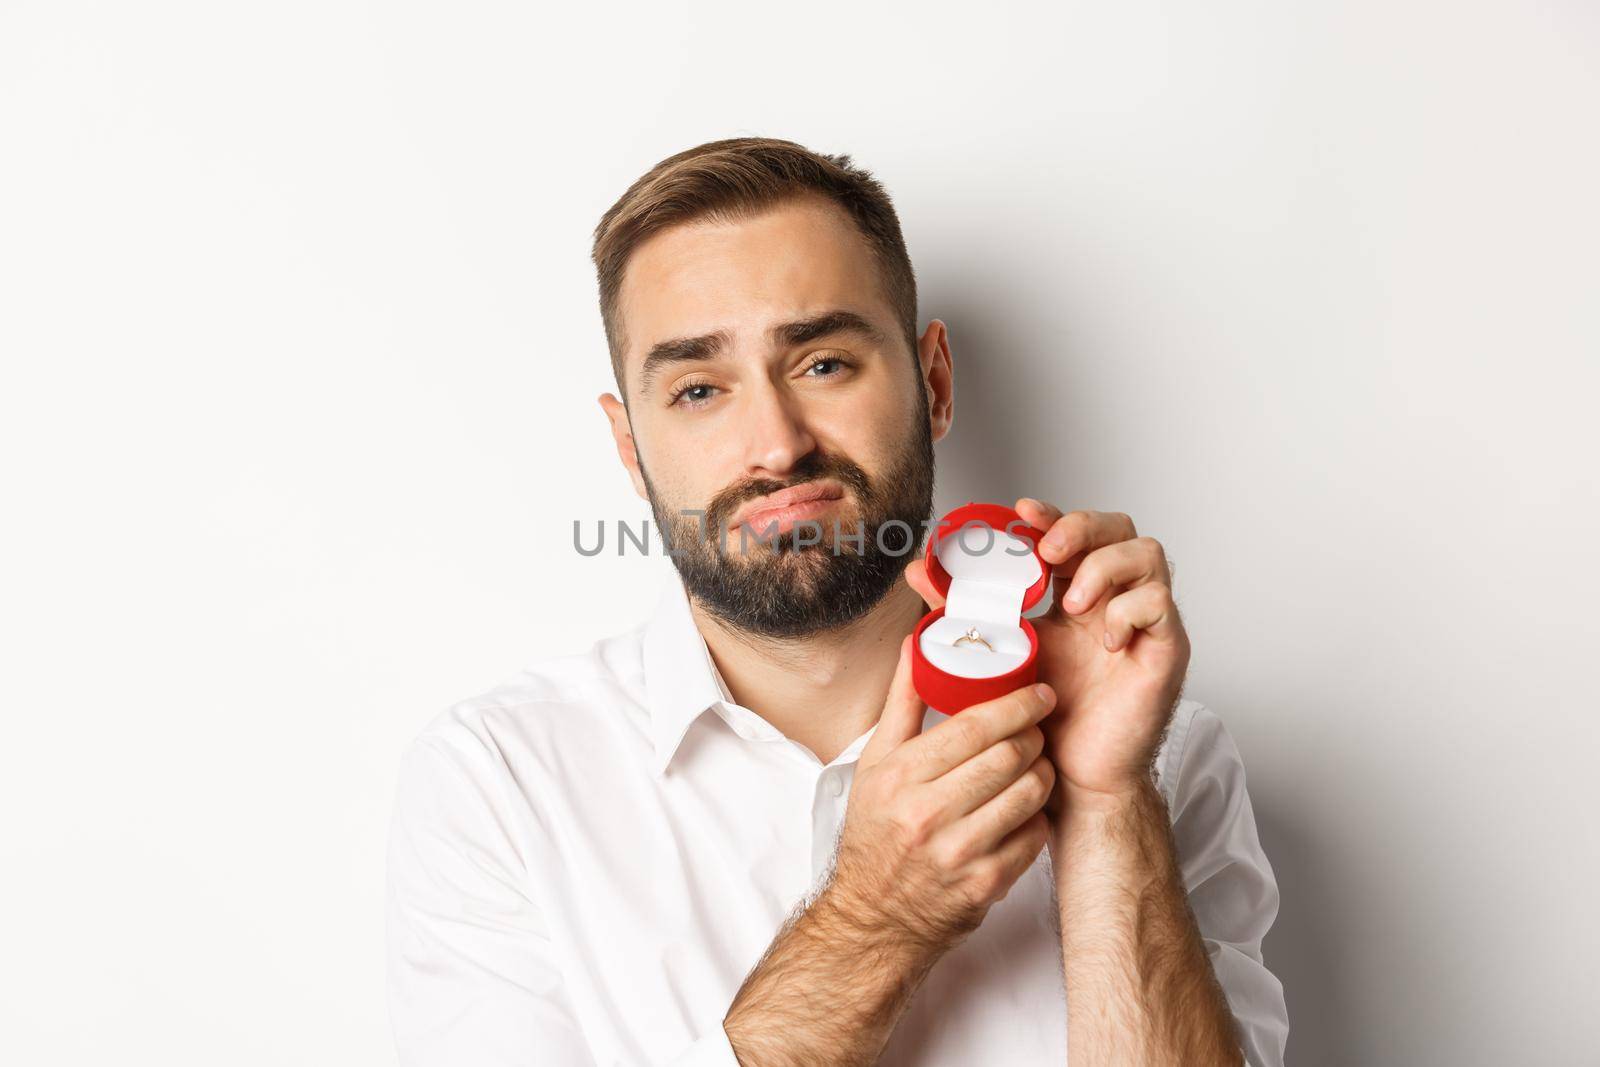 Close-up of hopeful man begging to marry him, looking sad and showing wedding ring, making a proposal, white background.